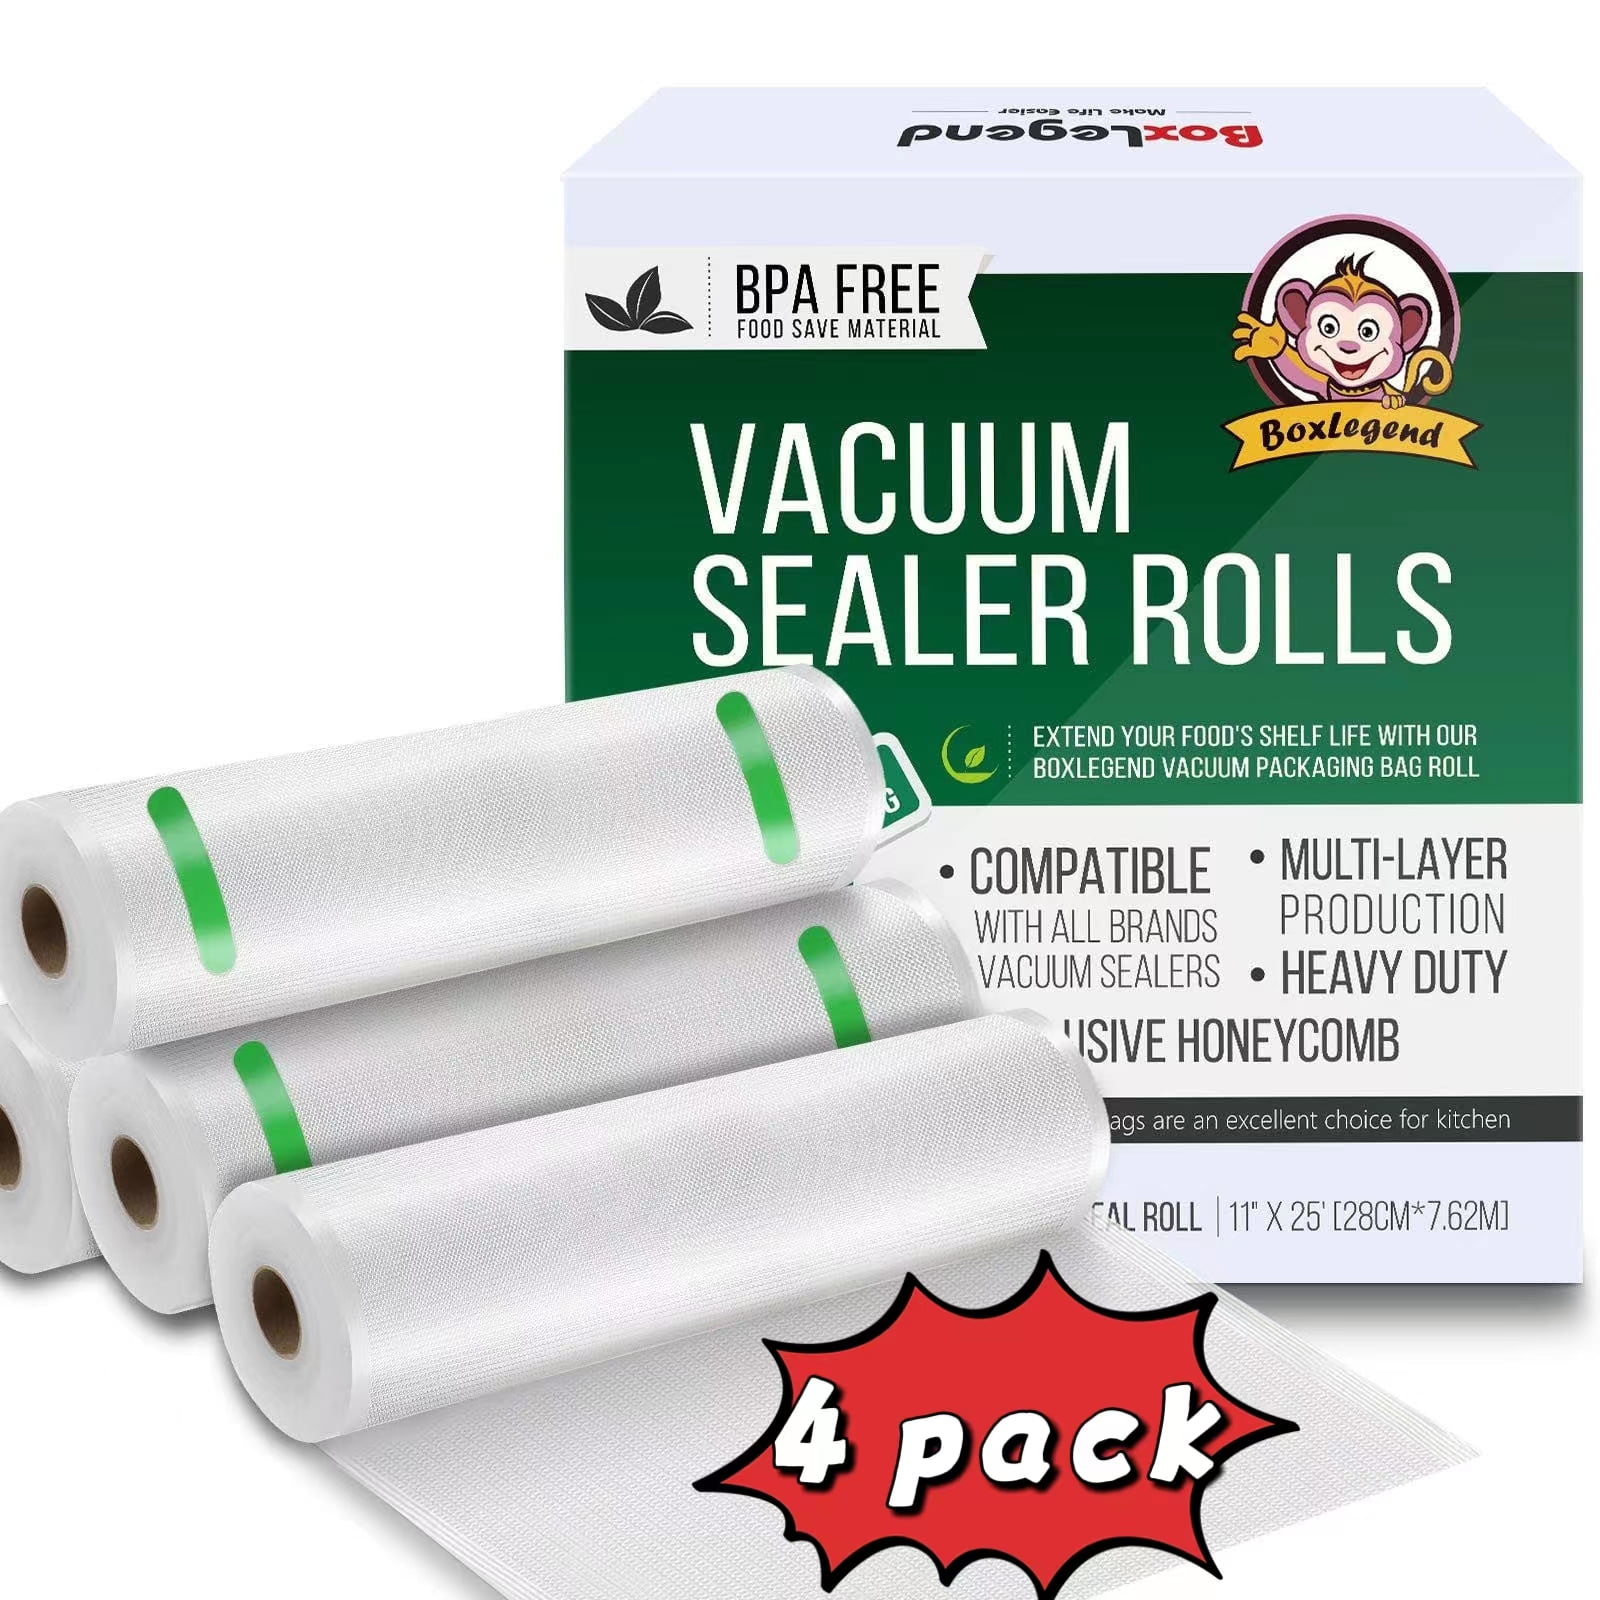 11 x 25' Rolls Fits Inside Machine - 4 Pack 100 Feet Total OutOfAir Vacuum for